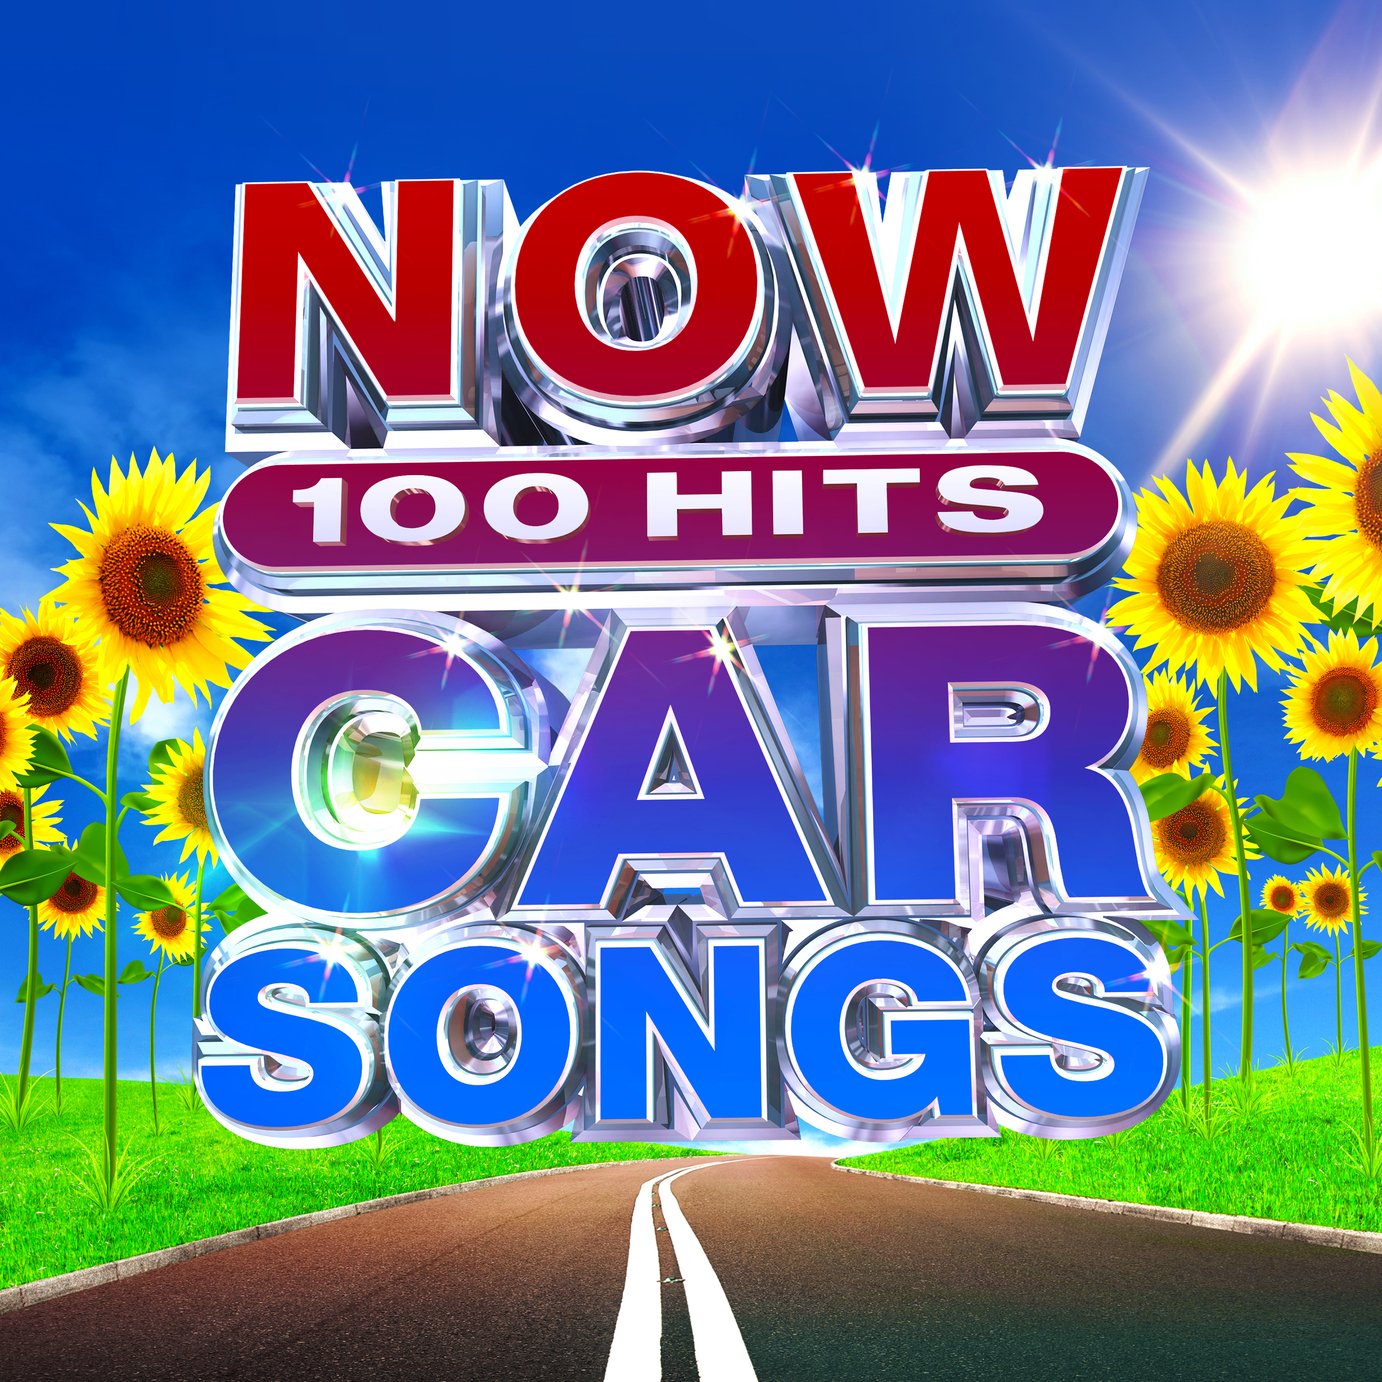 NOW 100 Hits Car Songs CD Review